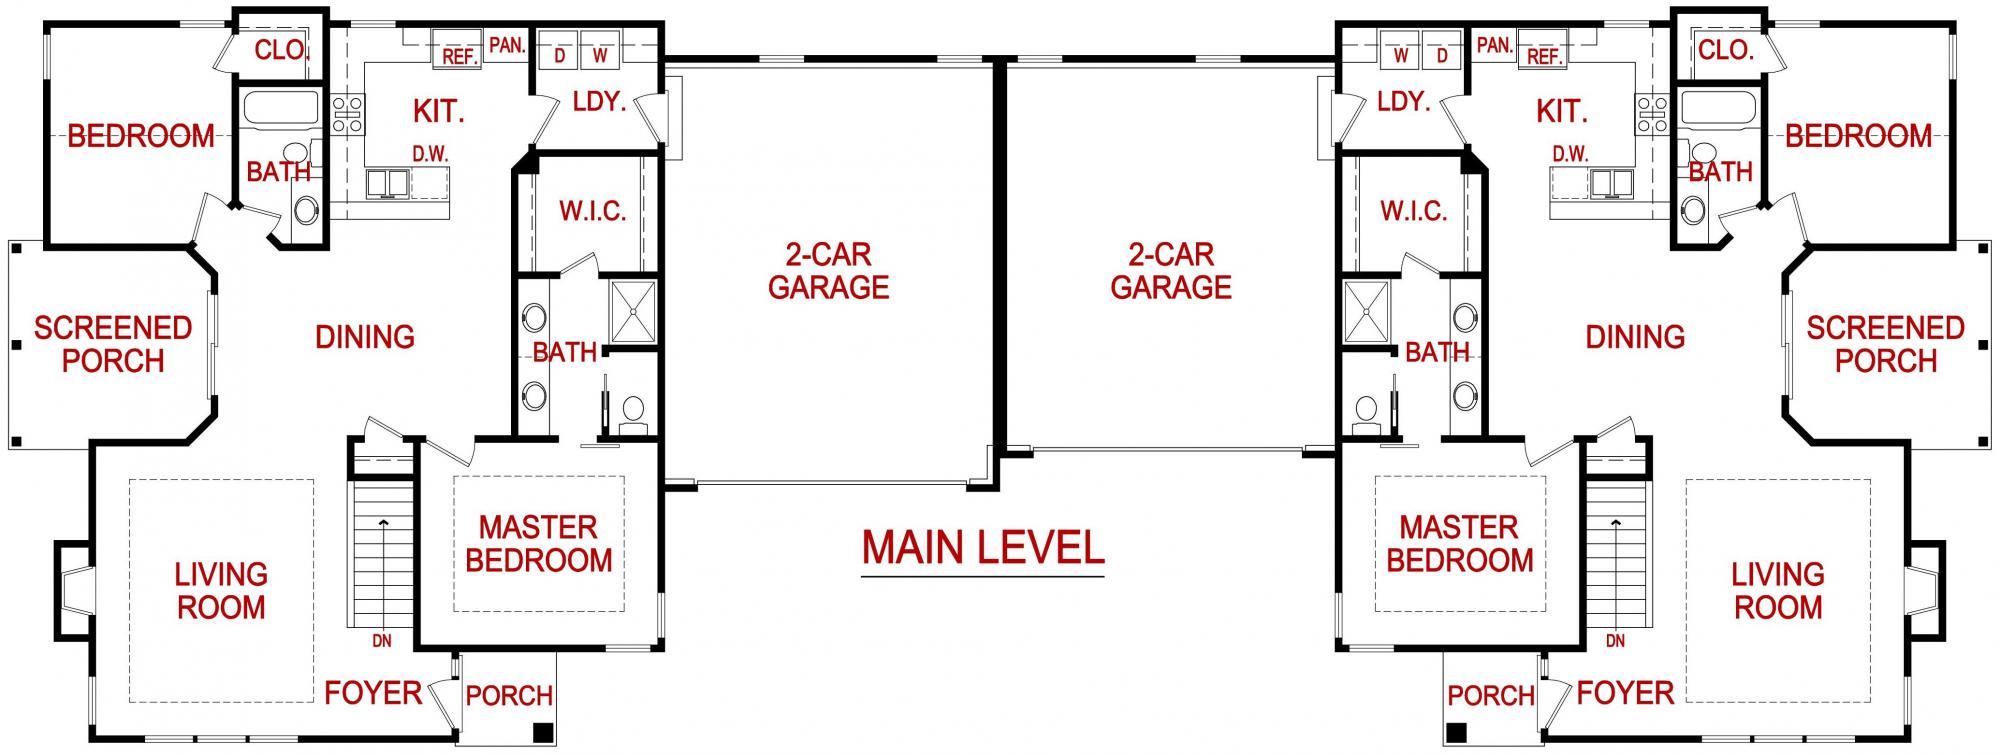 Main level floor plan of a Todd model from Lambie custom homes